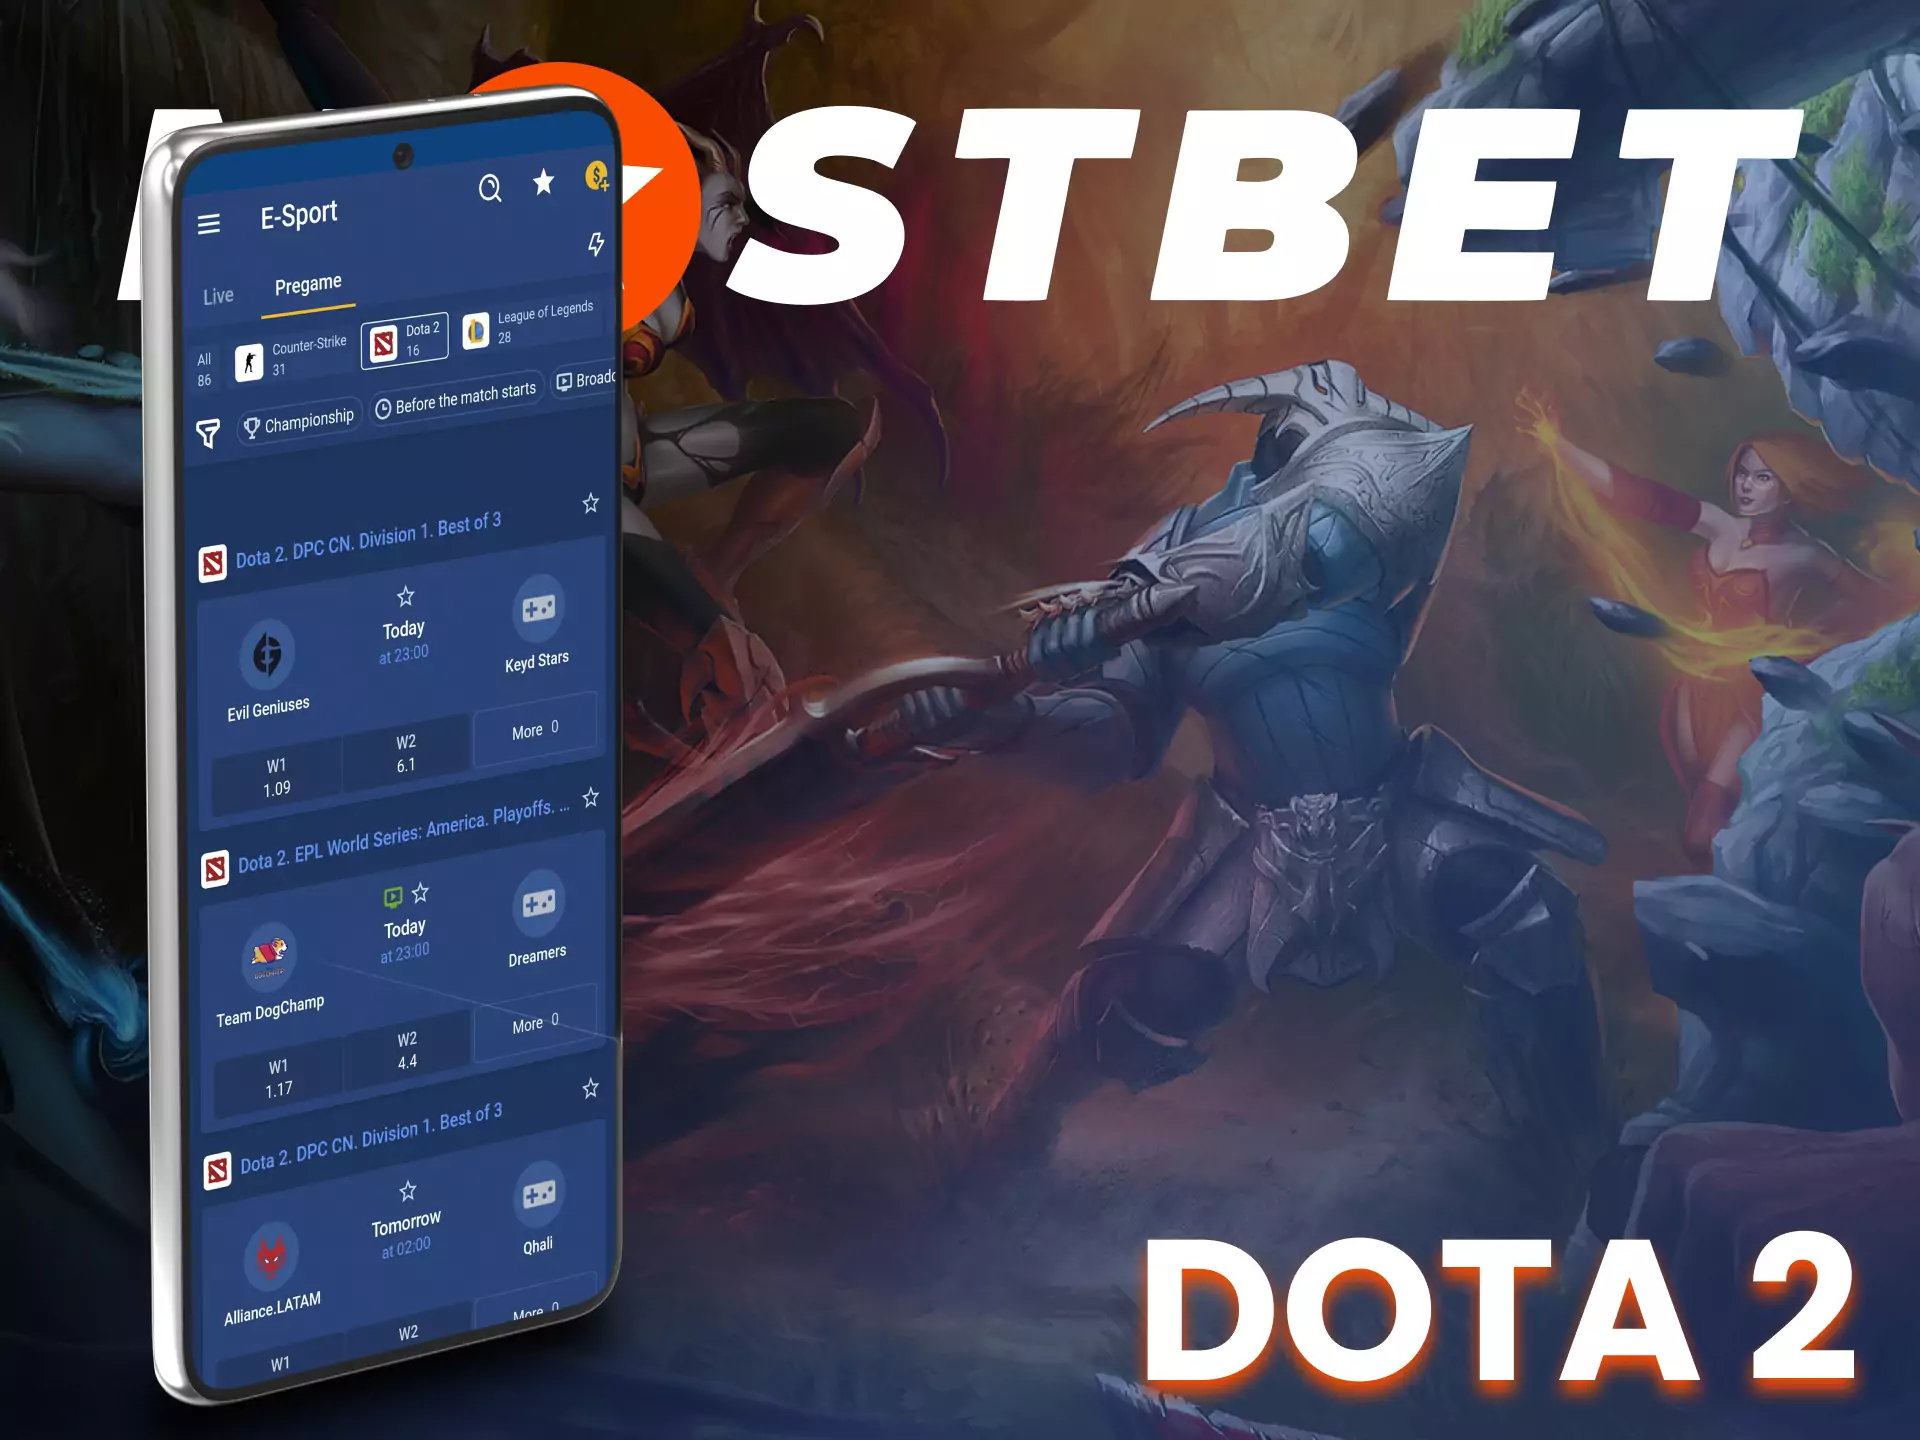 With the Mostbet app bet on DOTA 2.